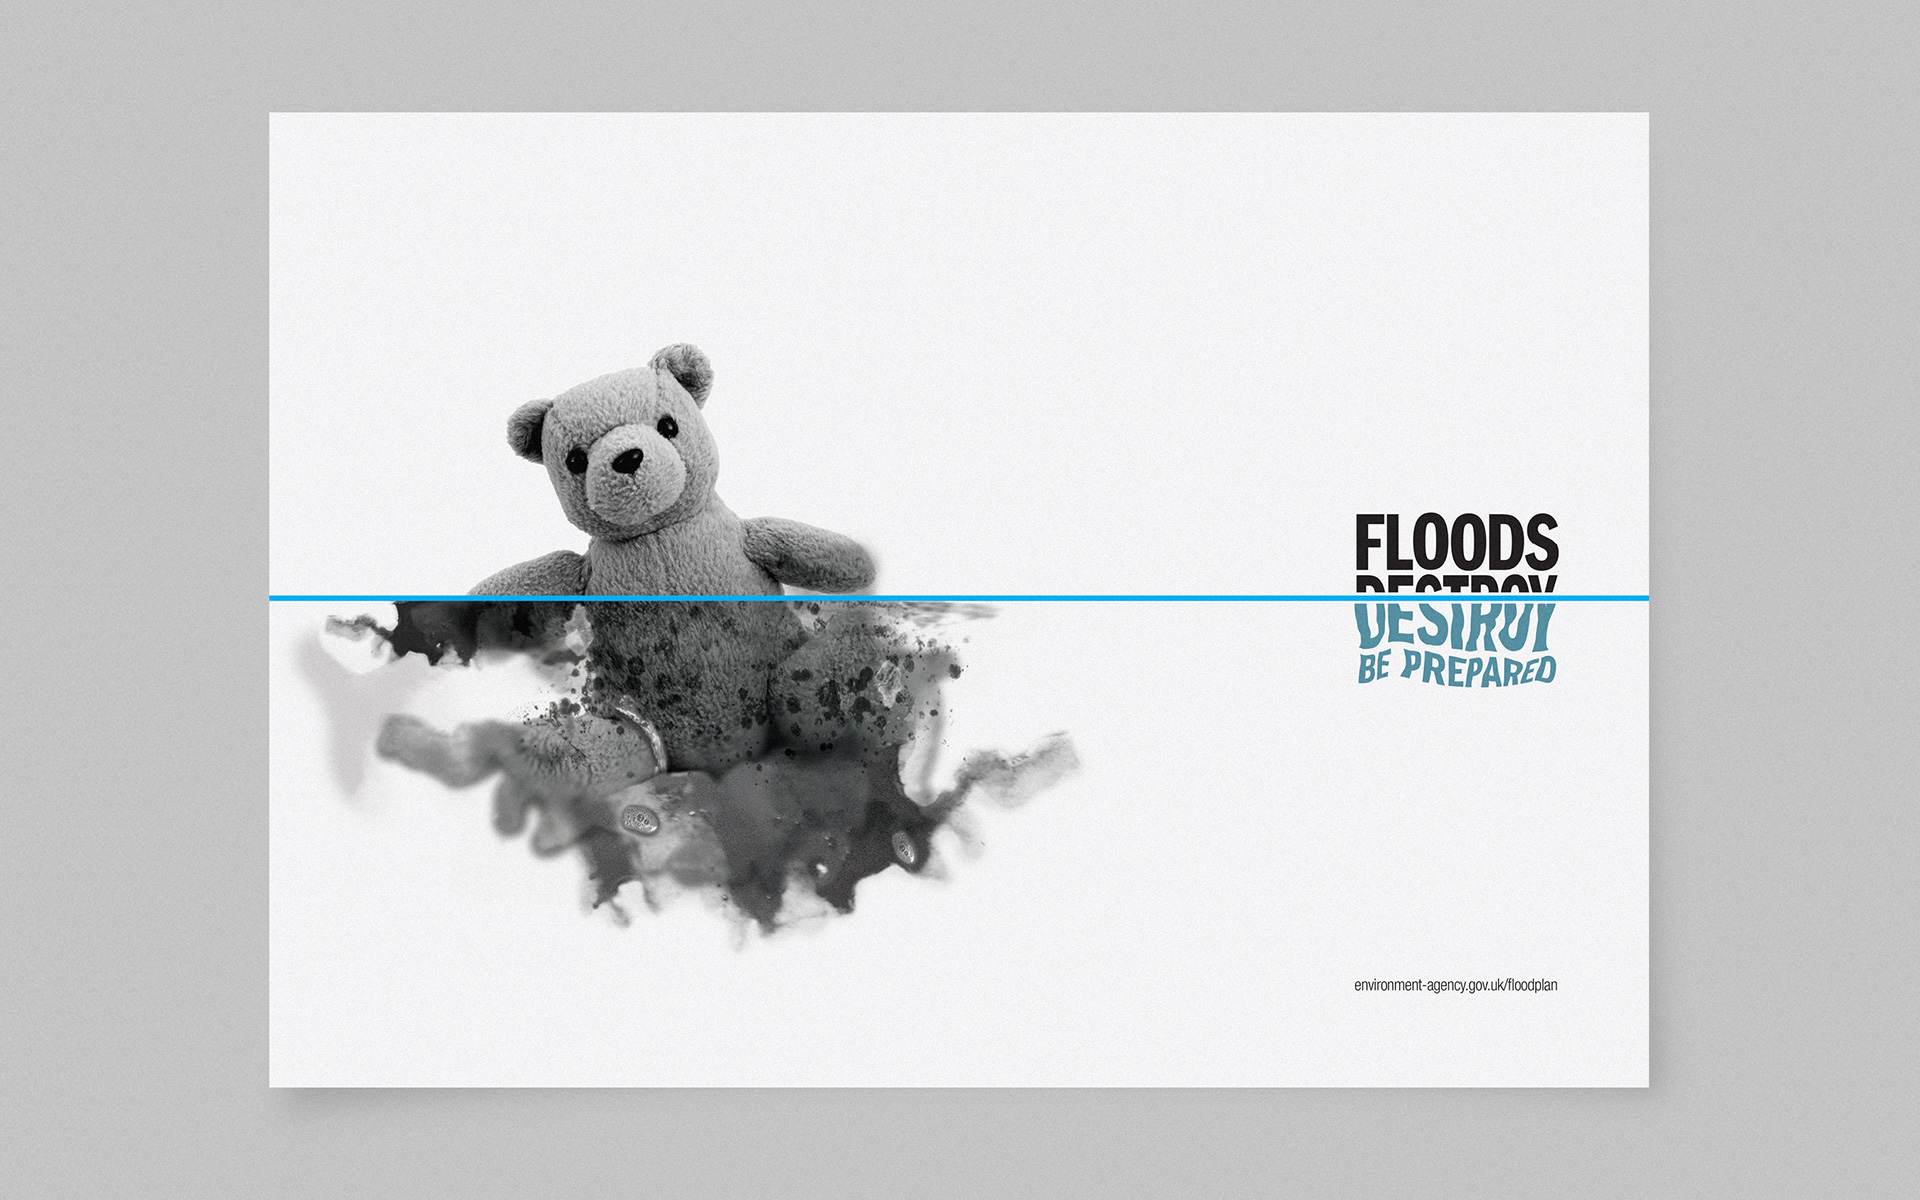 Environment Agency Floods Destroy Campaign Advert